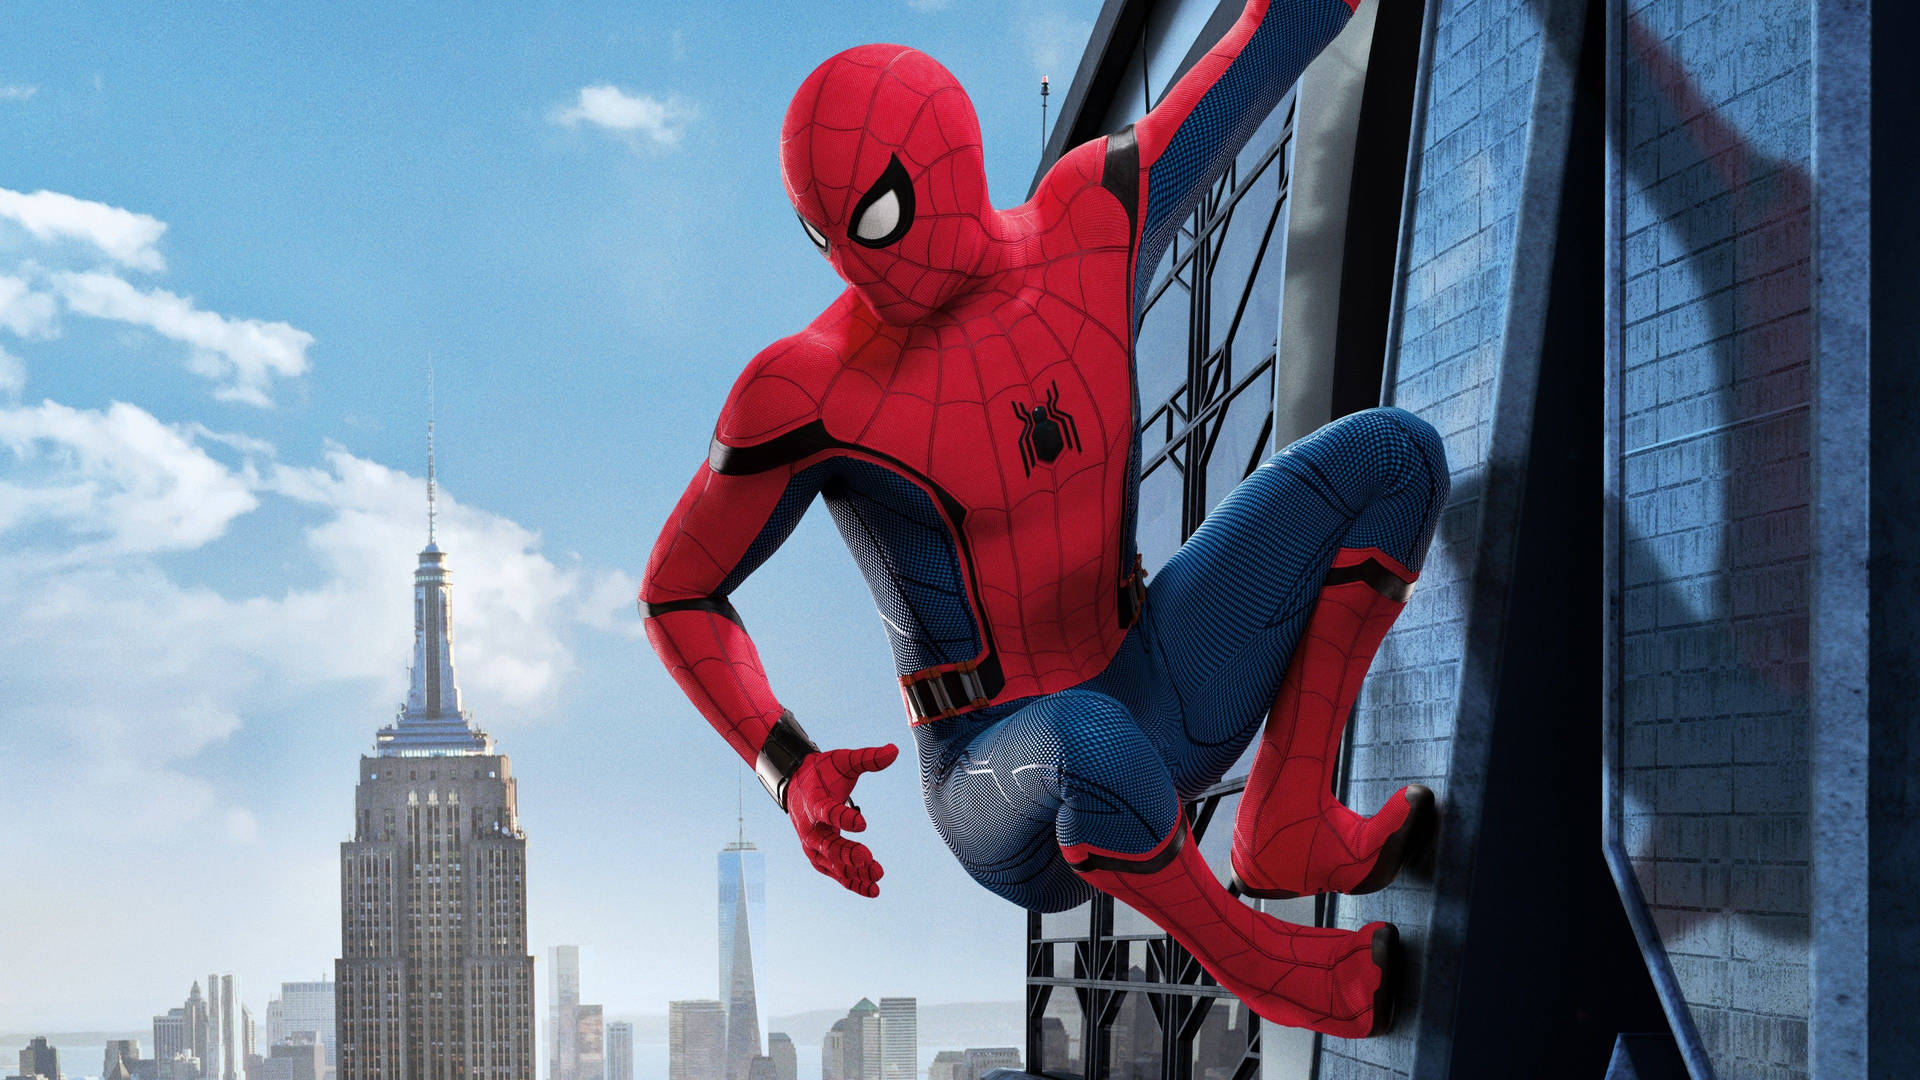 Spiderman Out on Patrol Wallpaper